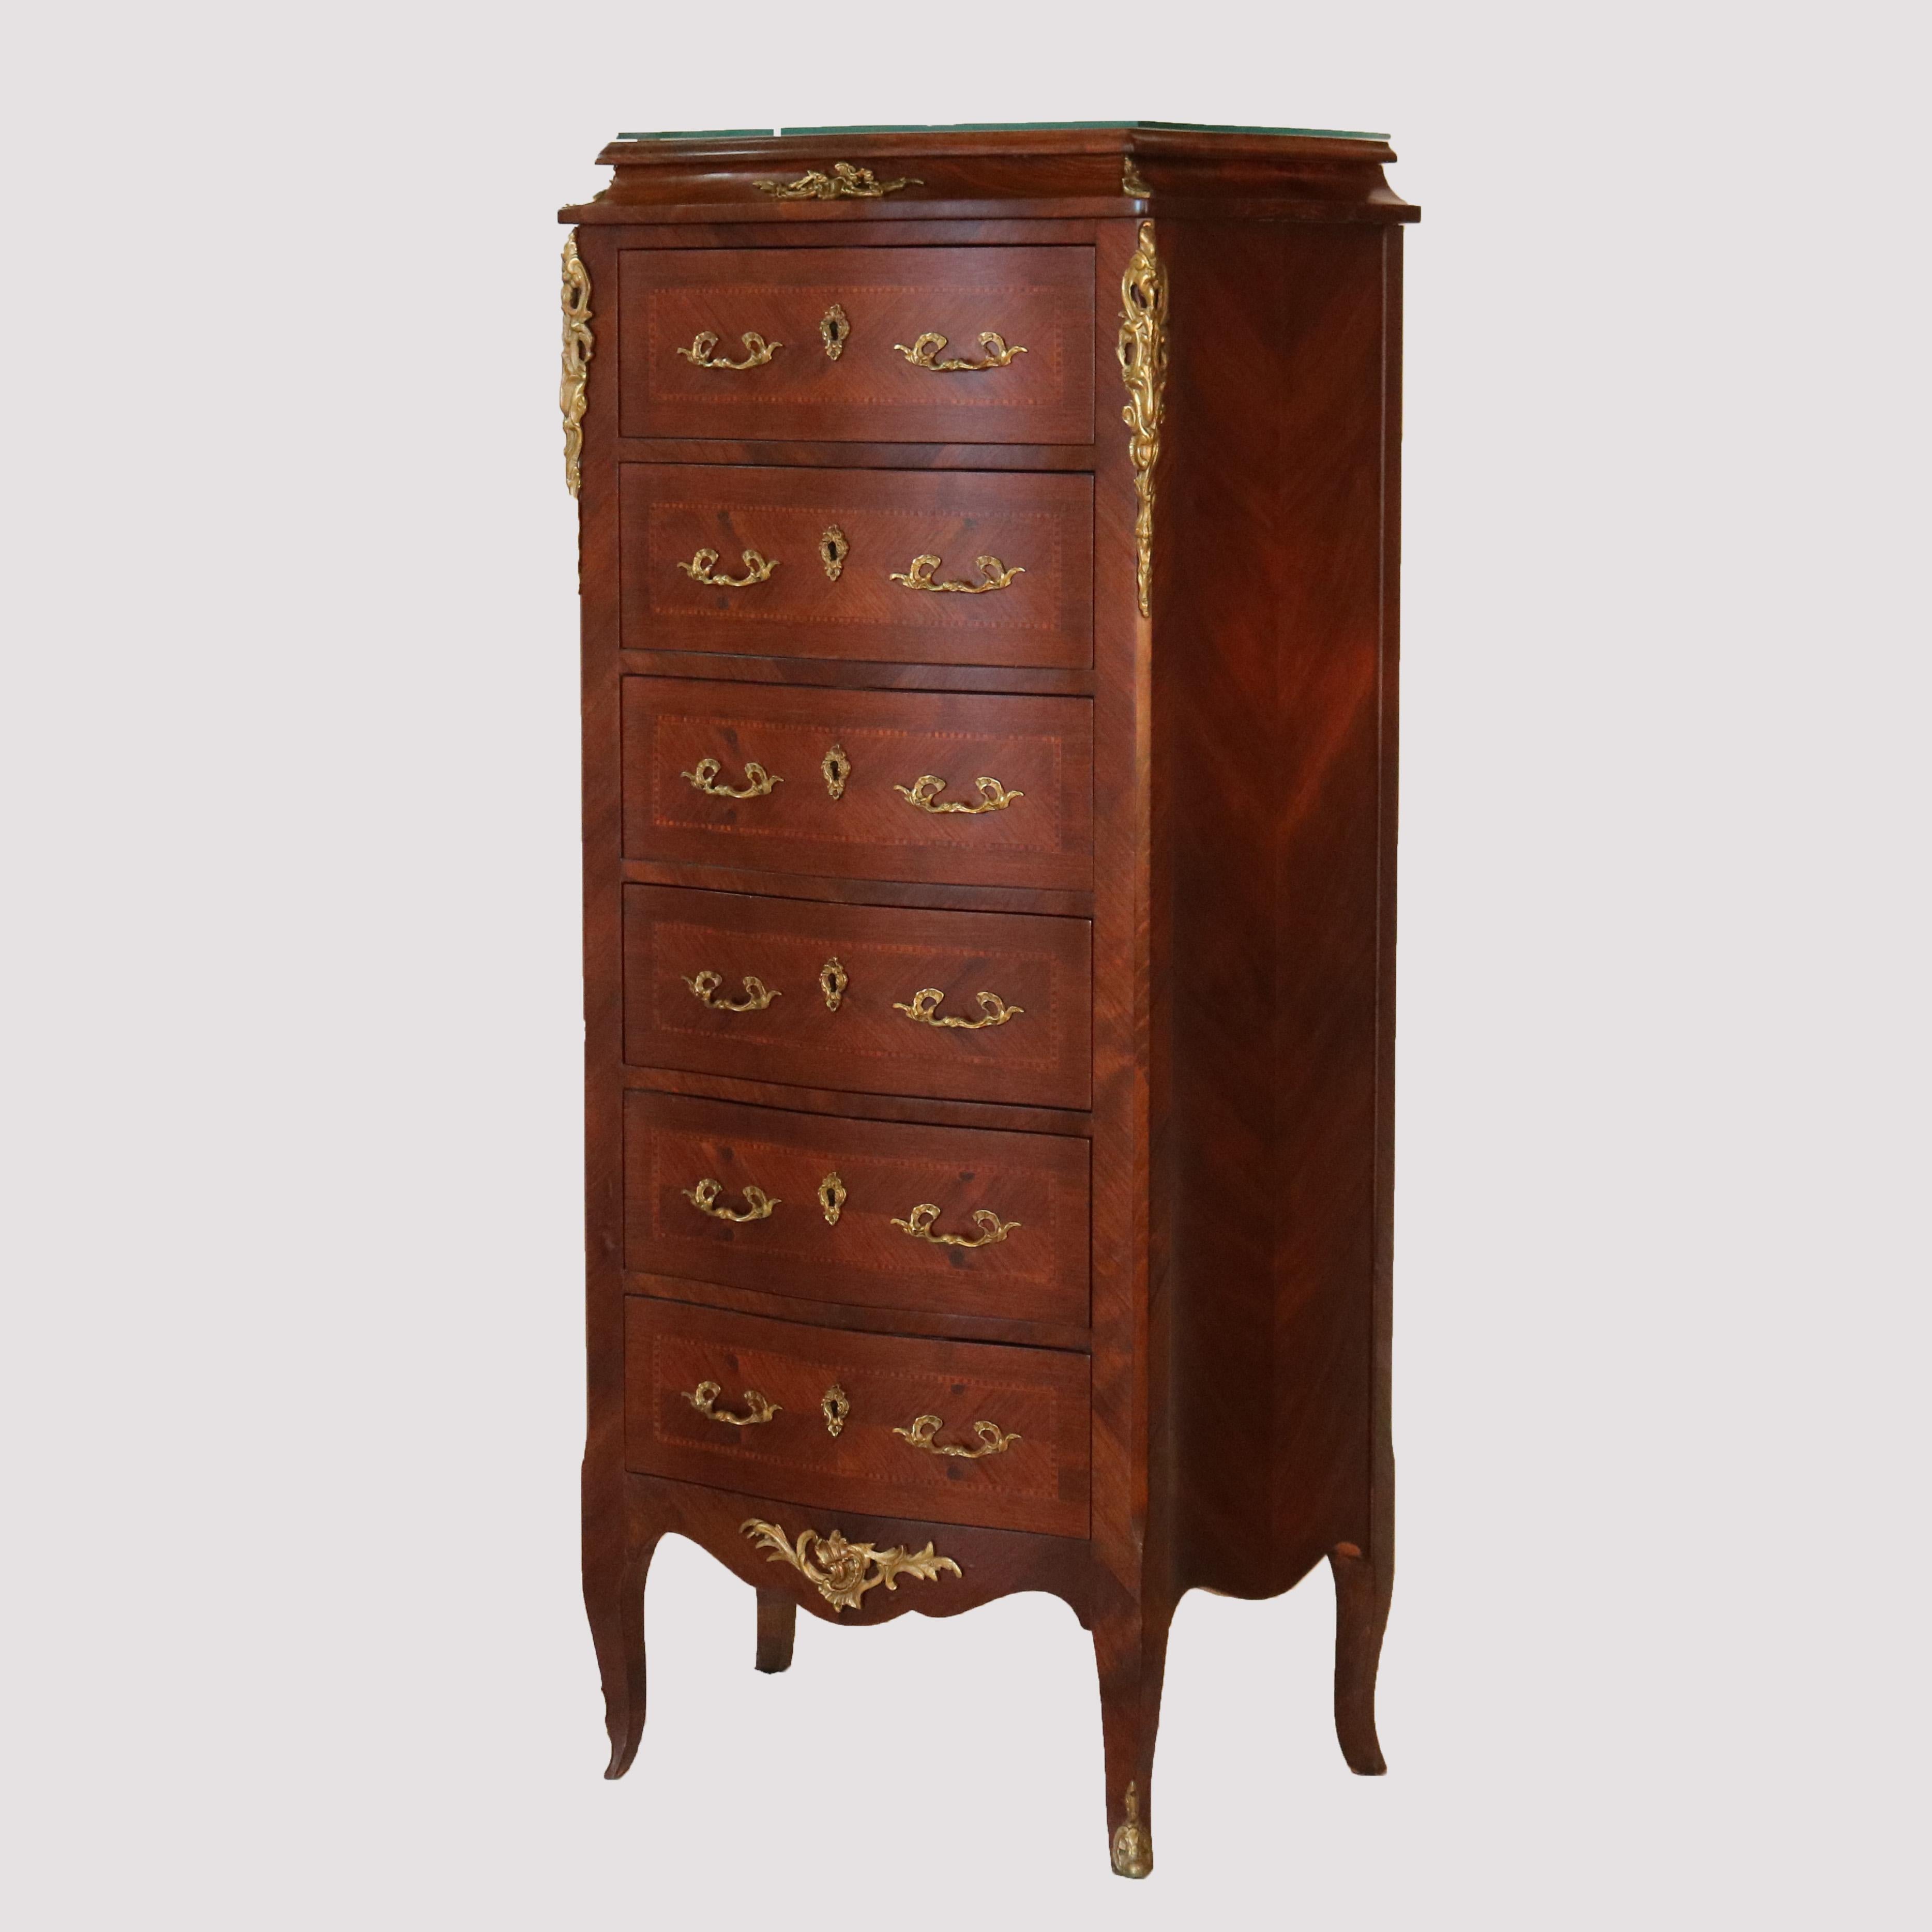 A French Louis XIV lingerie style (reproduction) chest offers kingwood construction with six drawers having bookmatched facing with satinwood banding, foliate cast pulls and mounts throughout, raised on cabriole legs, late 20th century.

Measures -